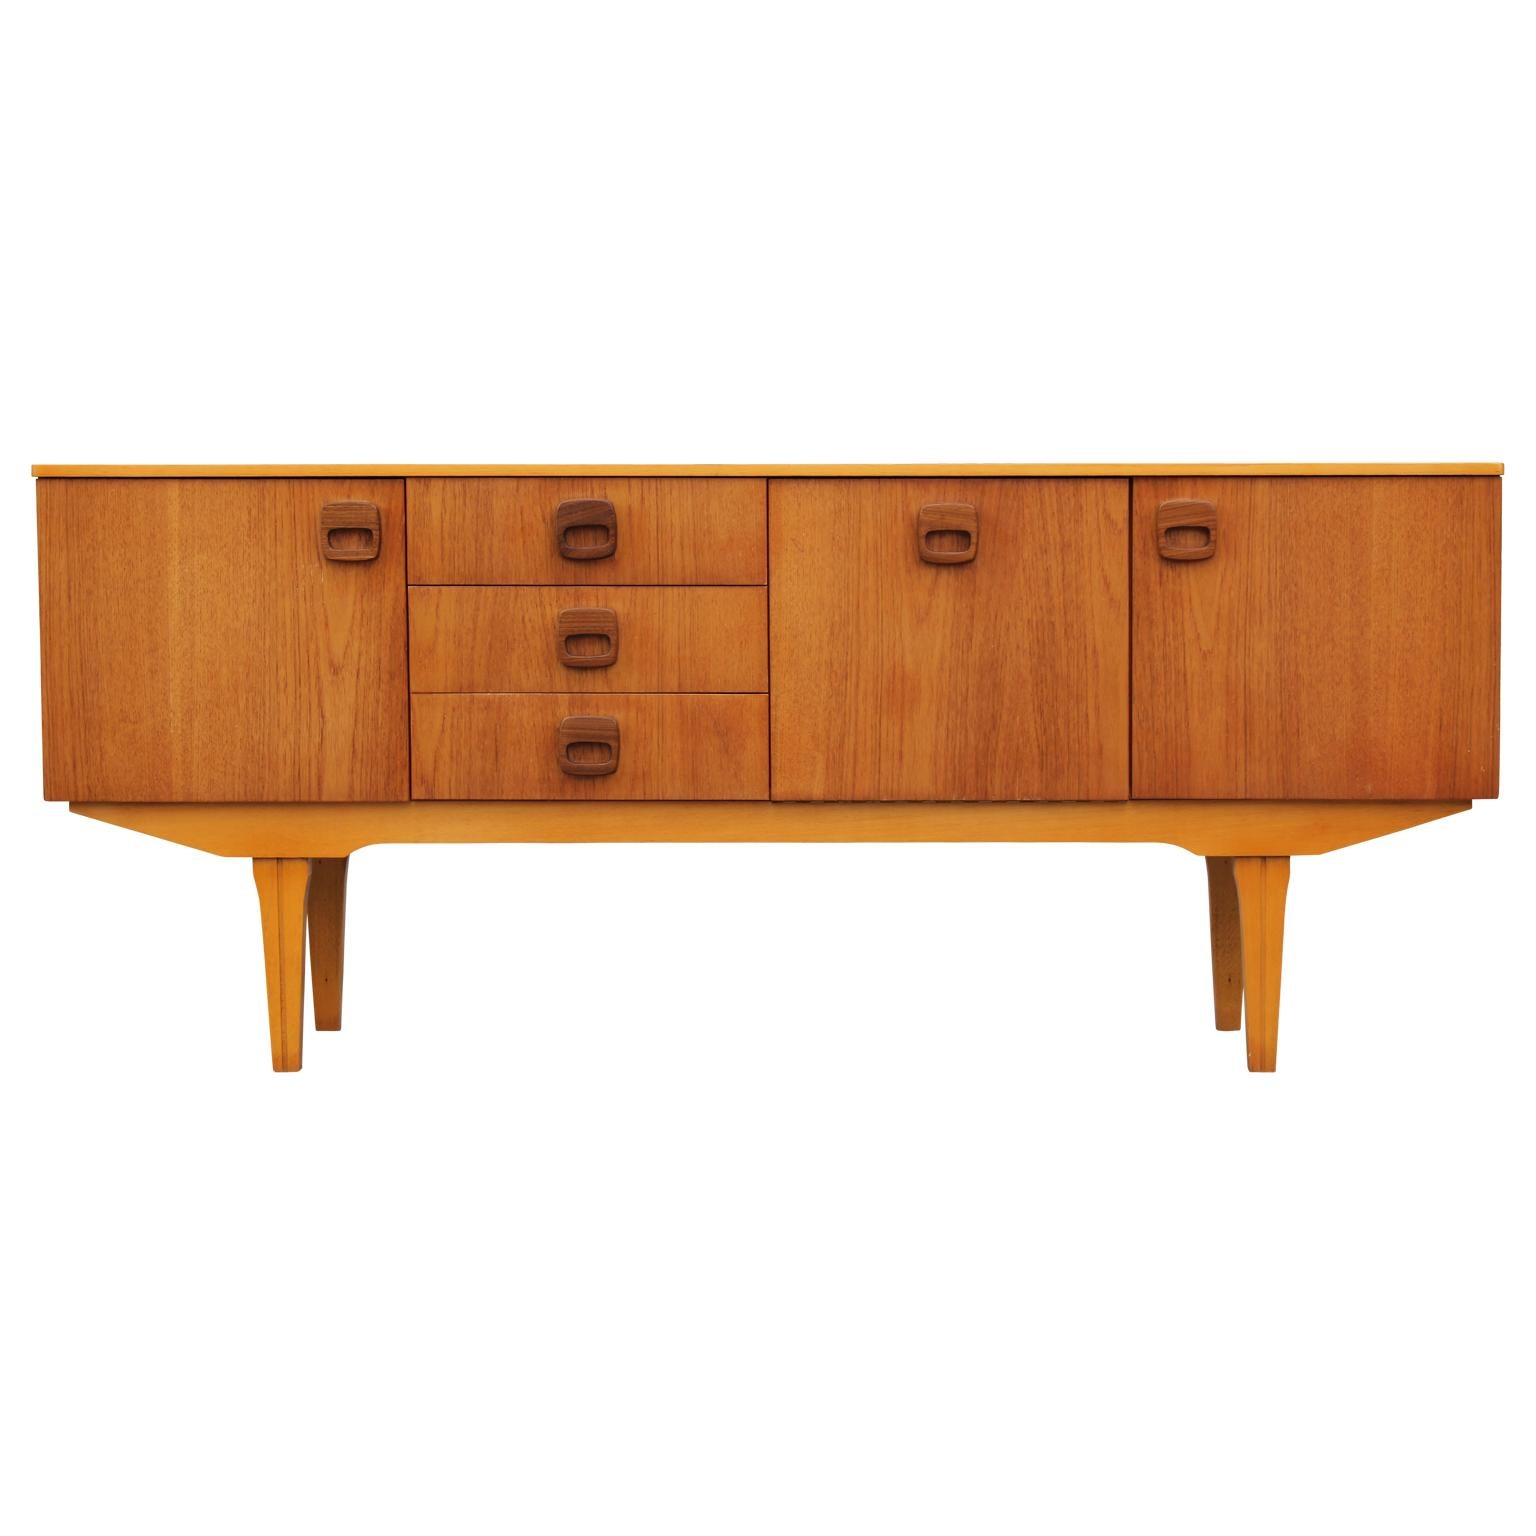 Beautiful modern Danish style teak sideboard or credenza with wooden ring handles, circa 1960s.